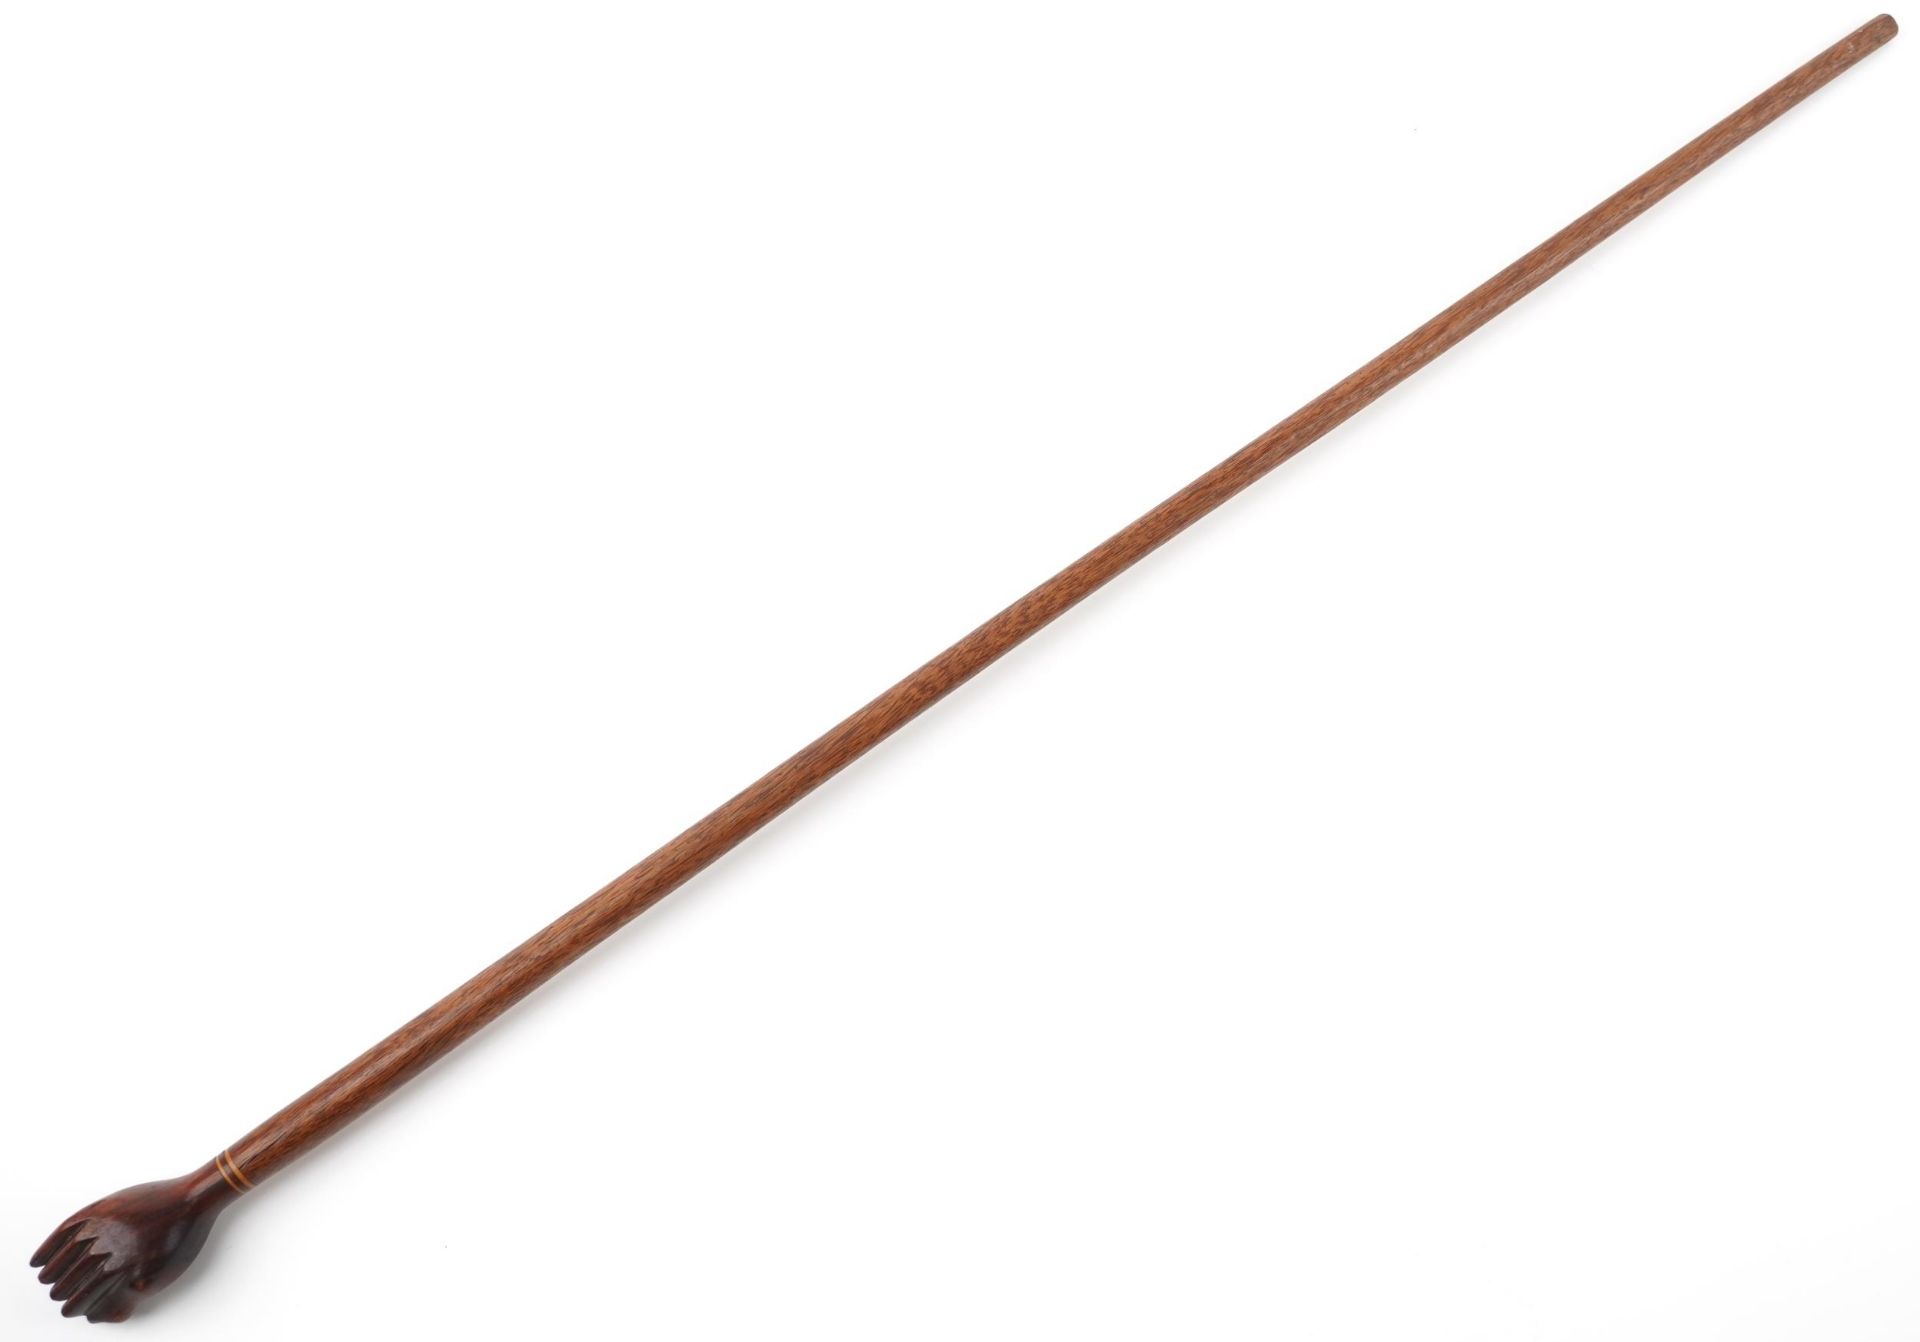 Hardwood Pitcairn Islands clenched fist walking stick, 94cm in length - Image 5 of 5